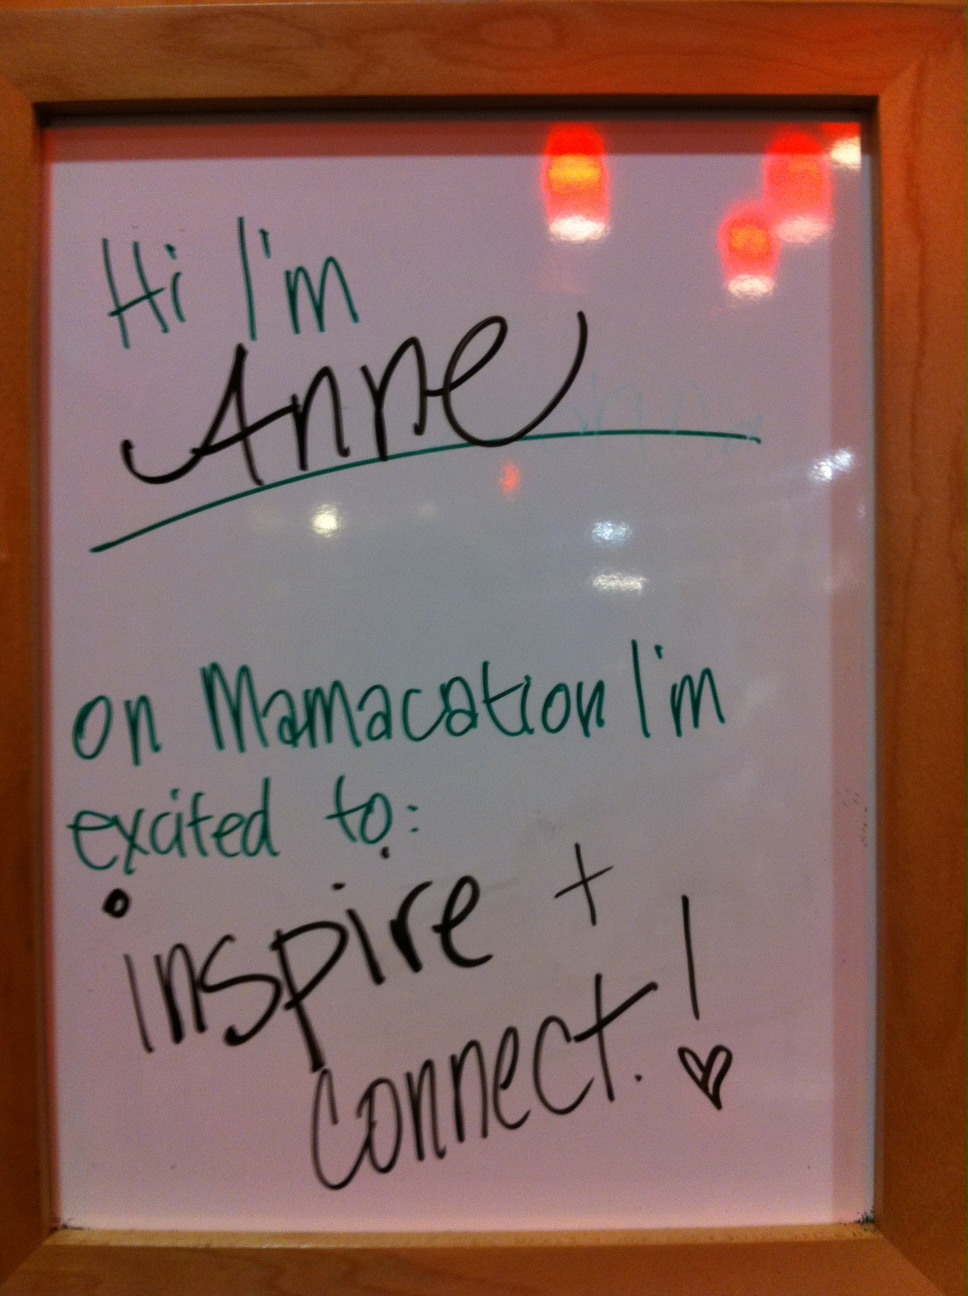 What did you love about Mamacation 2011?